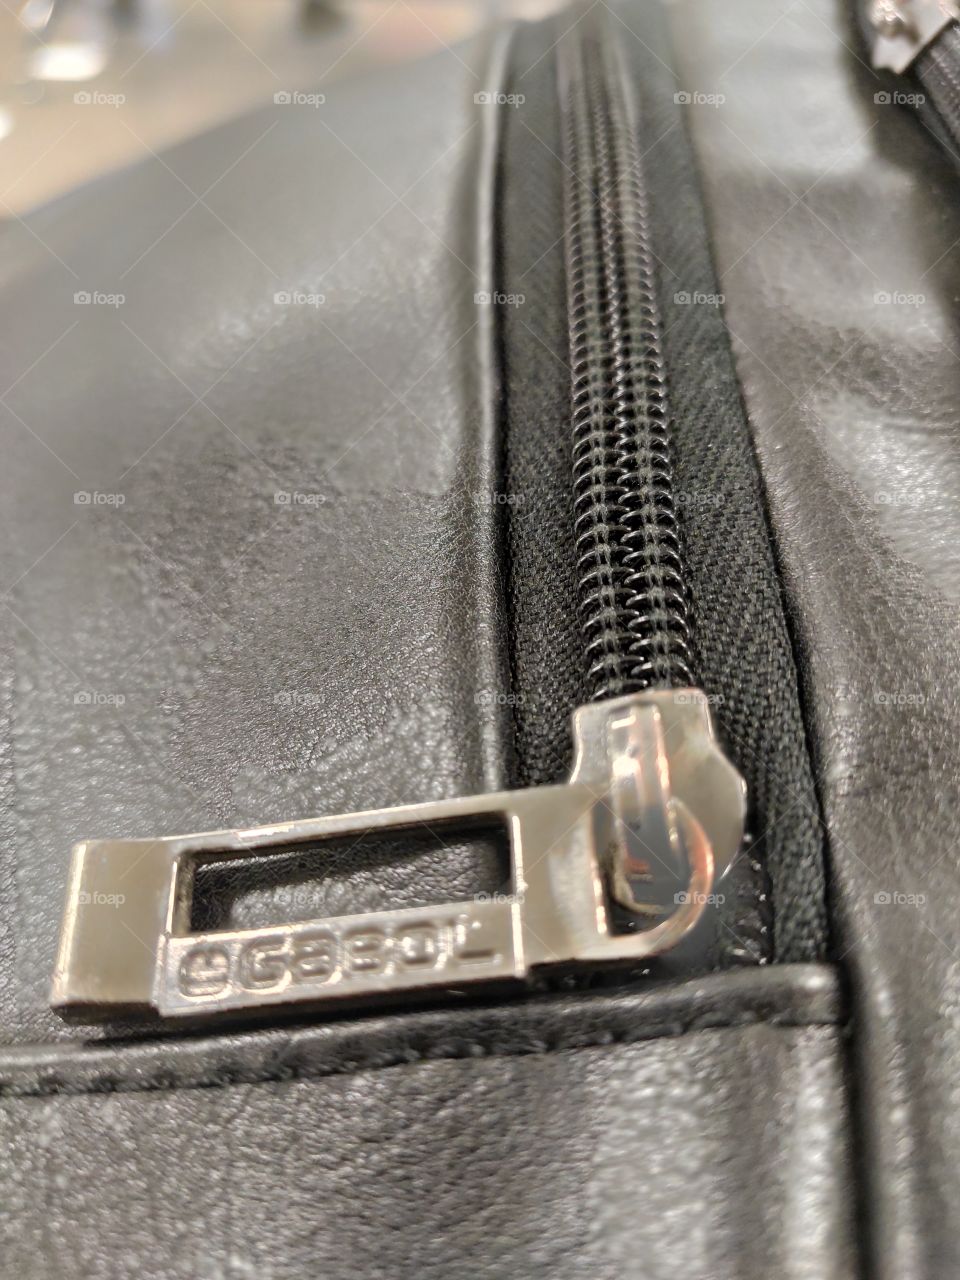 Macro image of a leather case with zipper